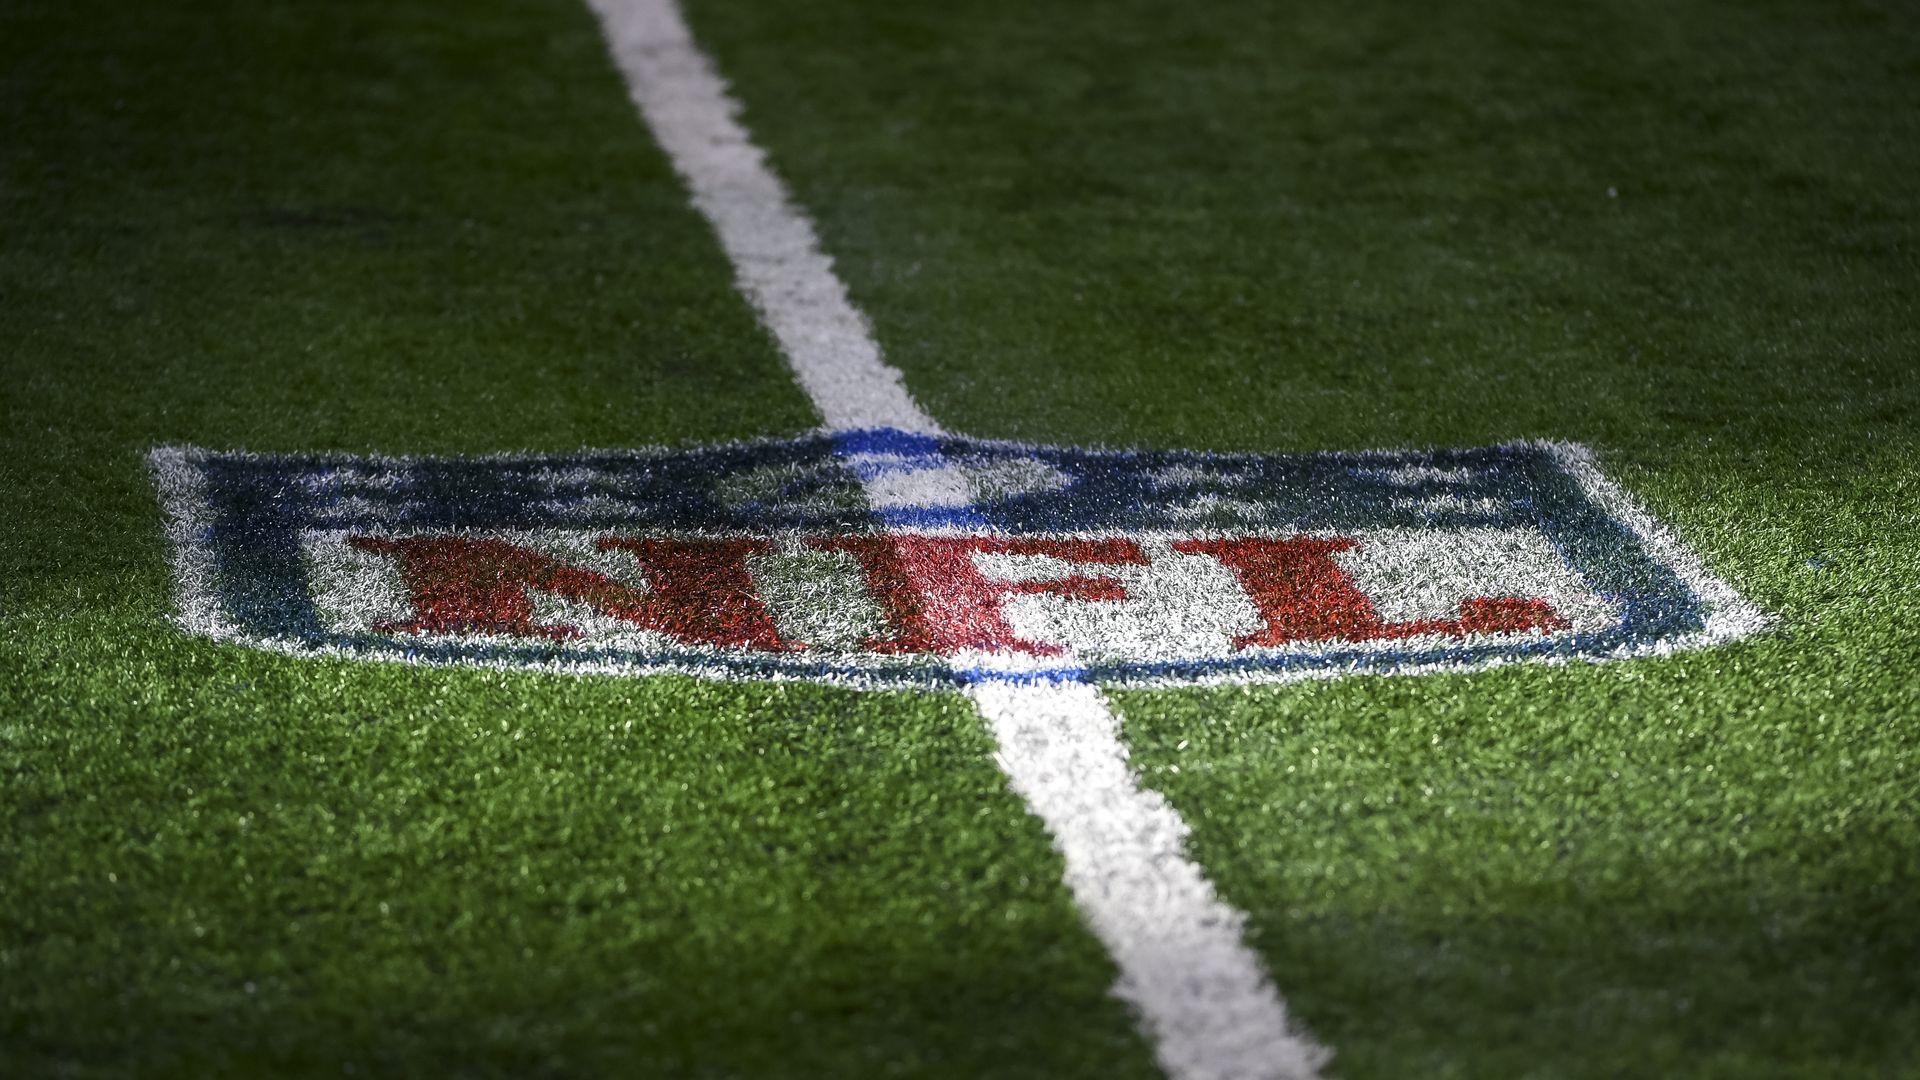 The NFL logo is pictured during the game between the Detroit Lions and Green Bay Packers at Ford Field on January 09, 2022 in Detroit, Michigan.